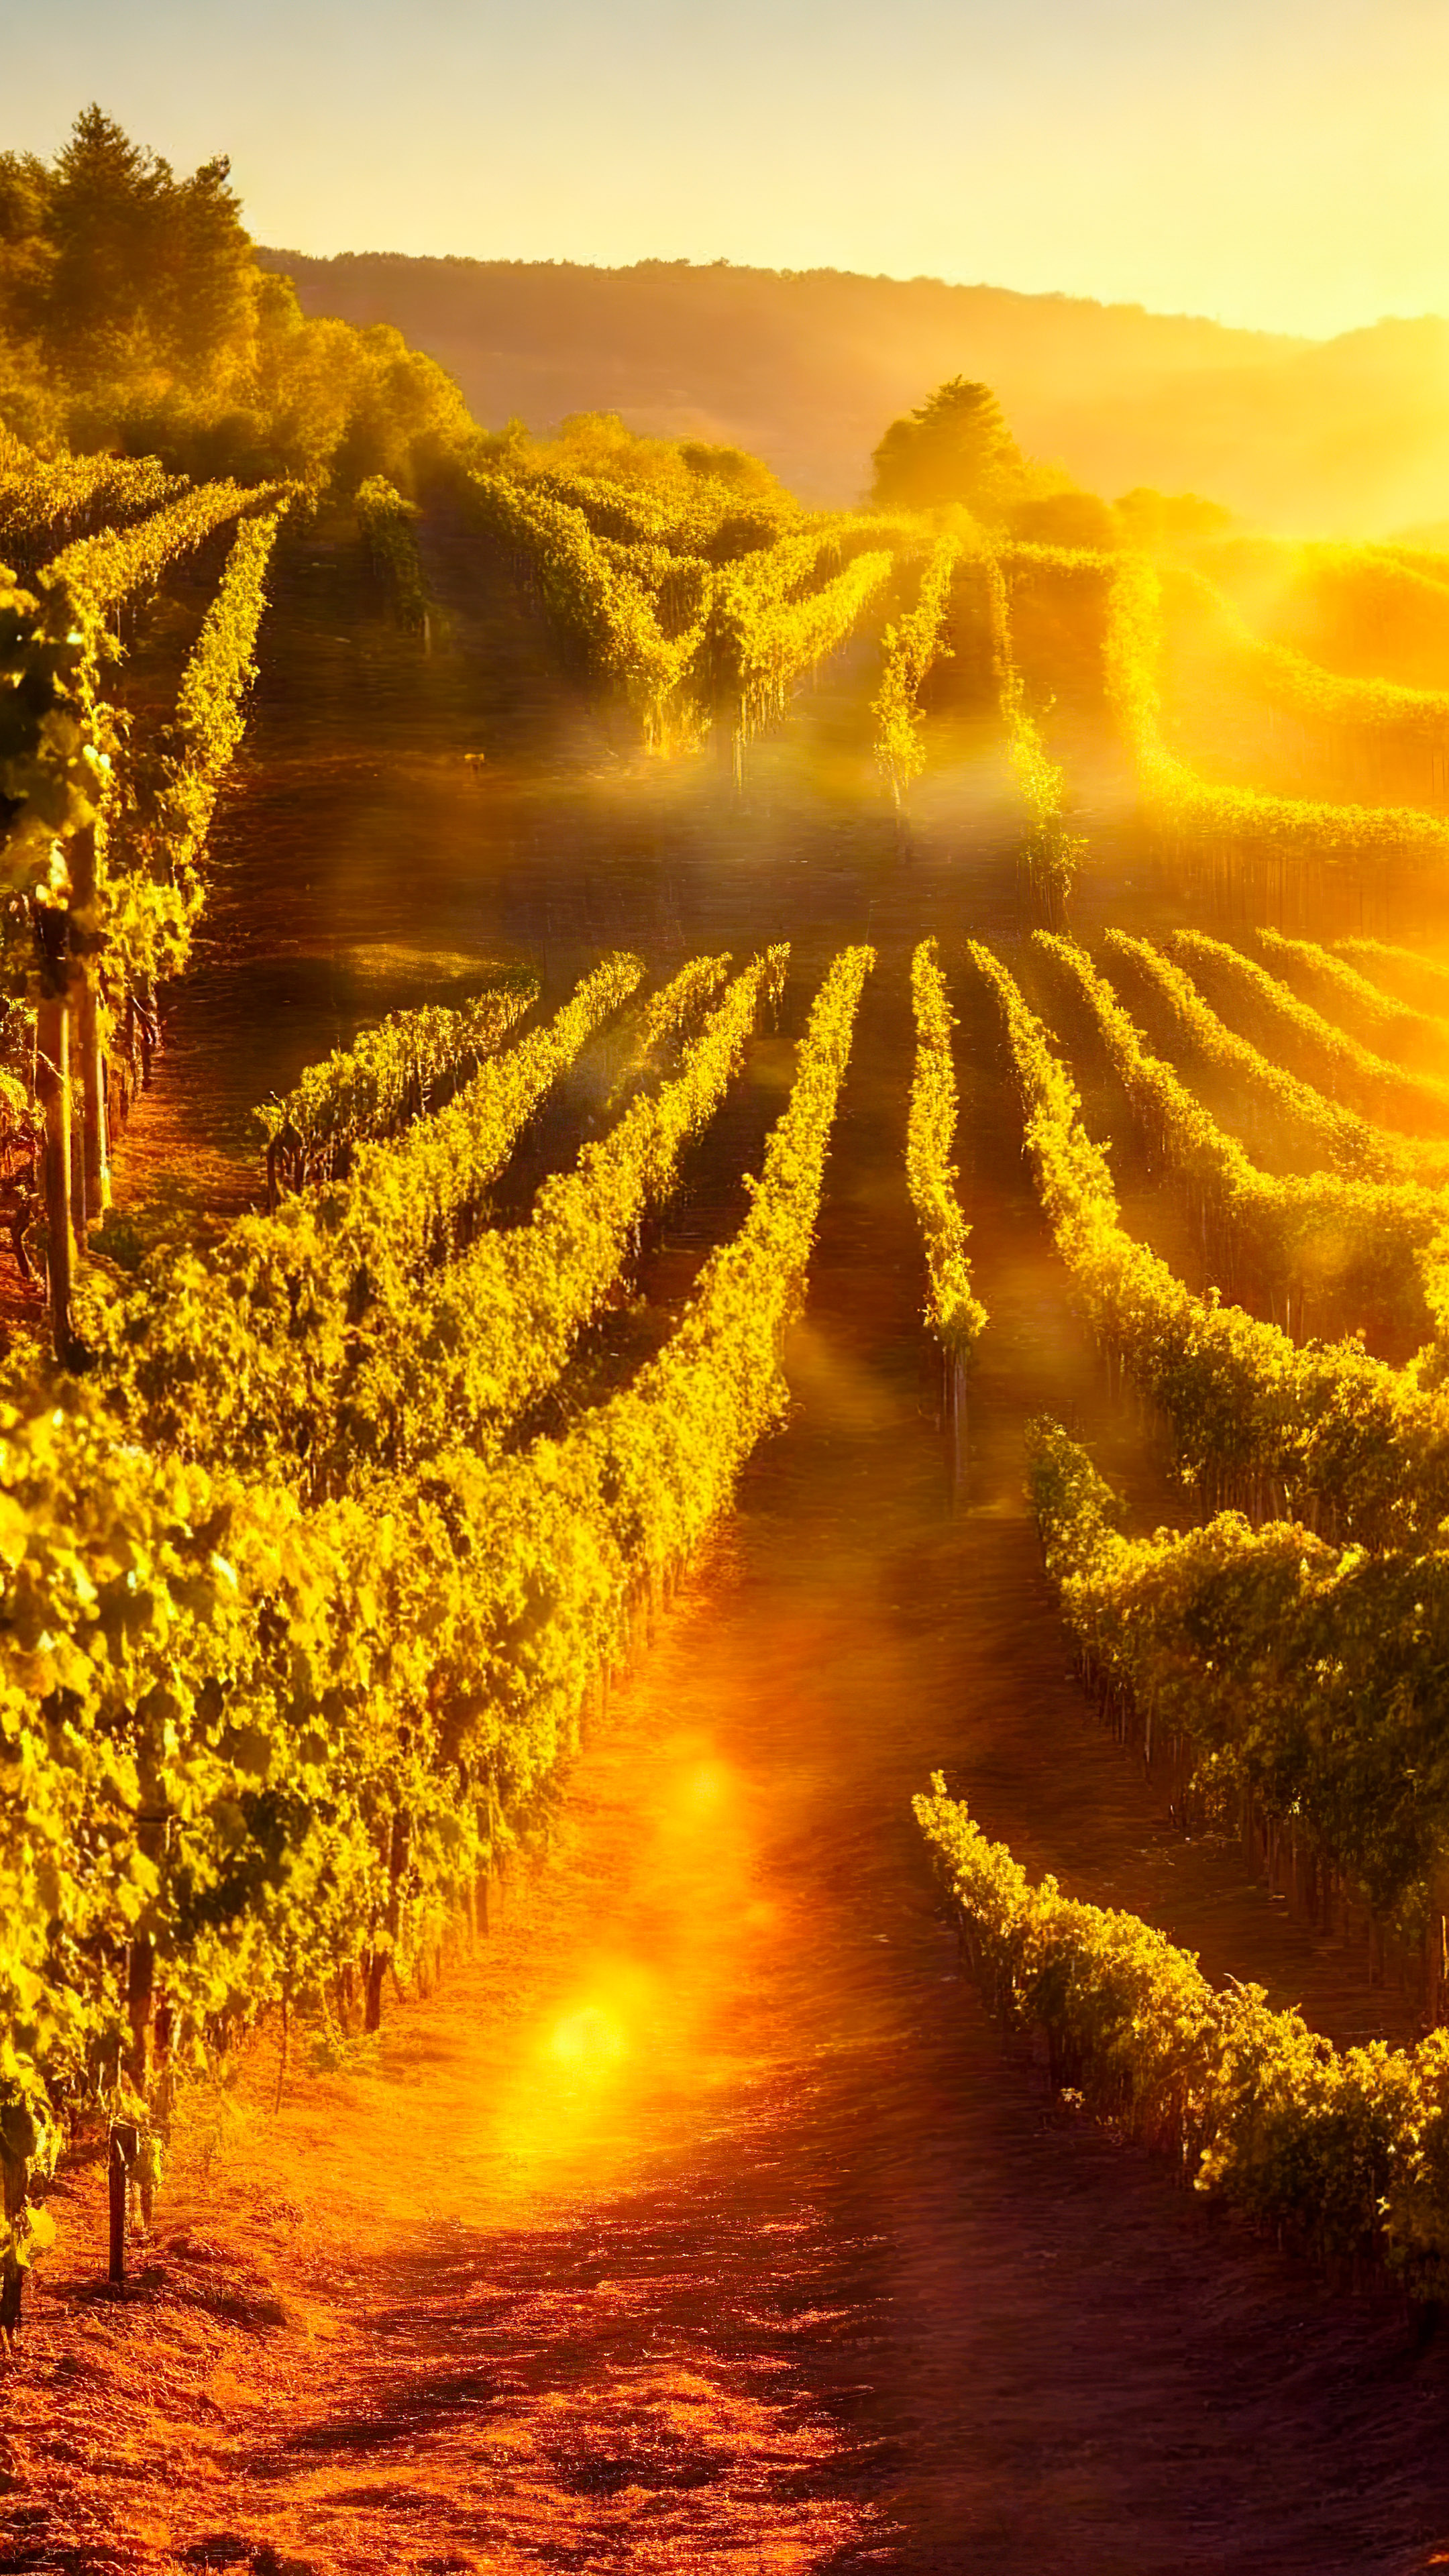 Bask in the warmth of our nature wallpaper for iPhone XS, showcasing a picturesque vineyard bathed in golden sunlight, with rows of grapevines stretching into the distance.